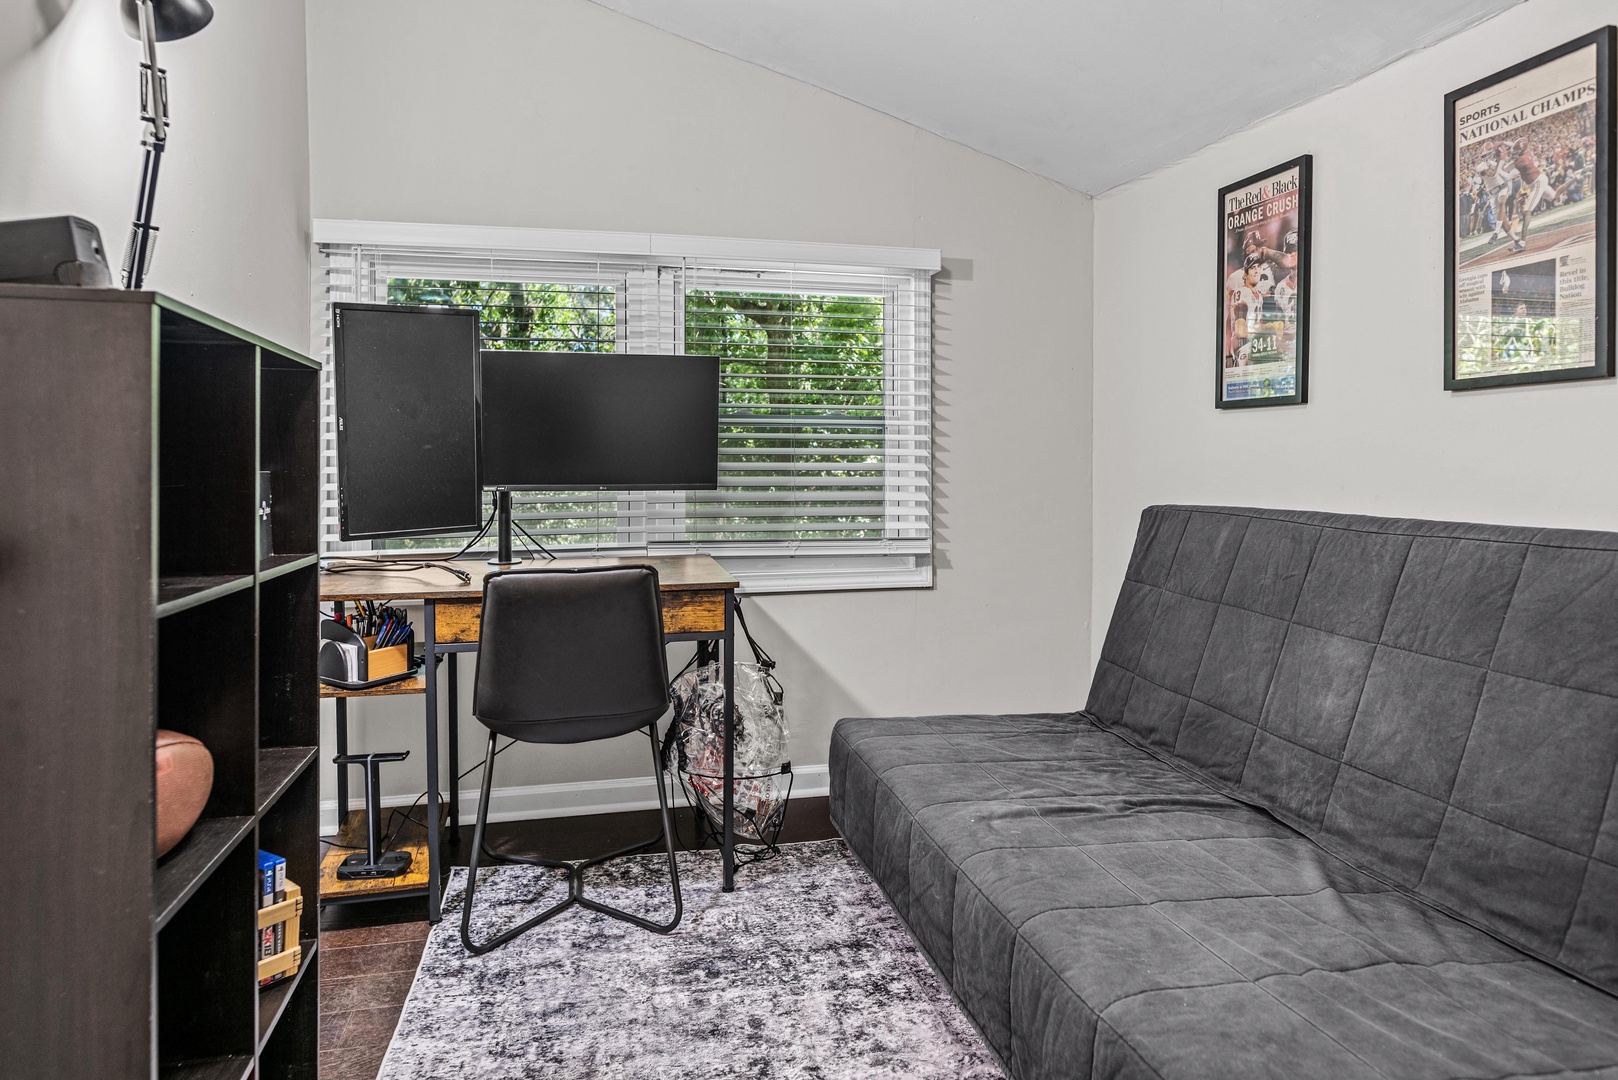 The 2nd bedroom offers a full-sized futon & can also serve as an office space